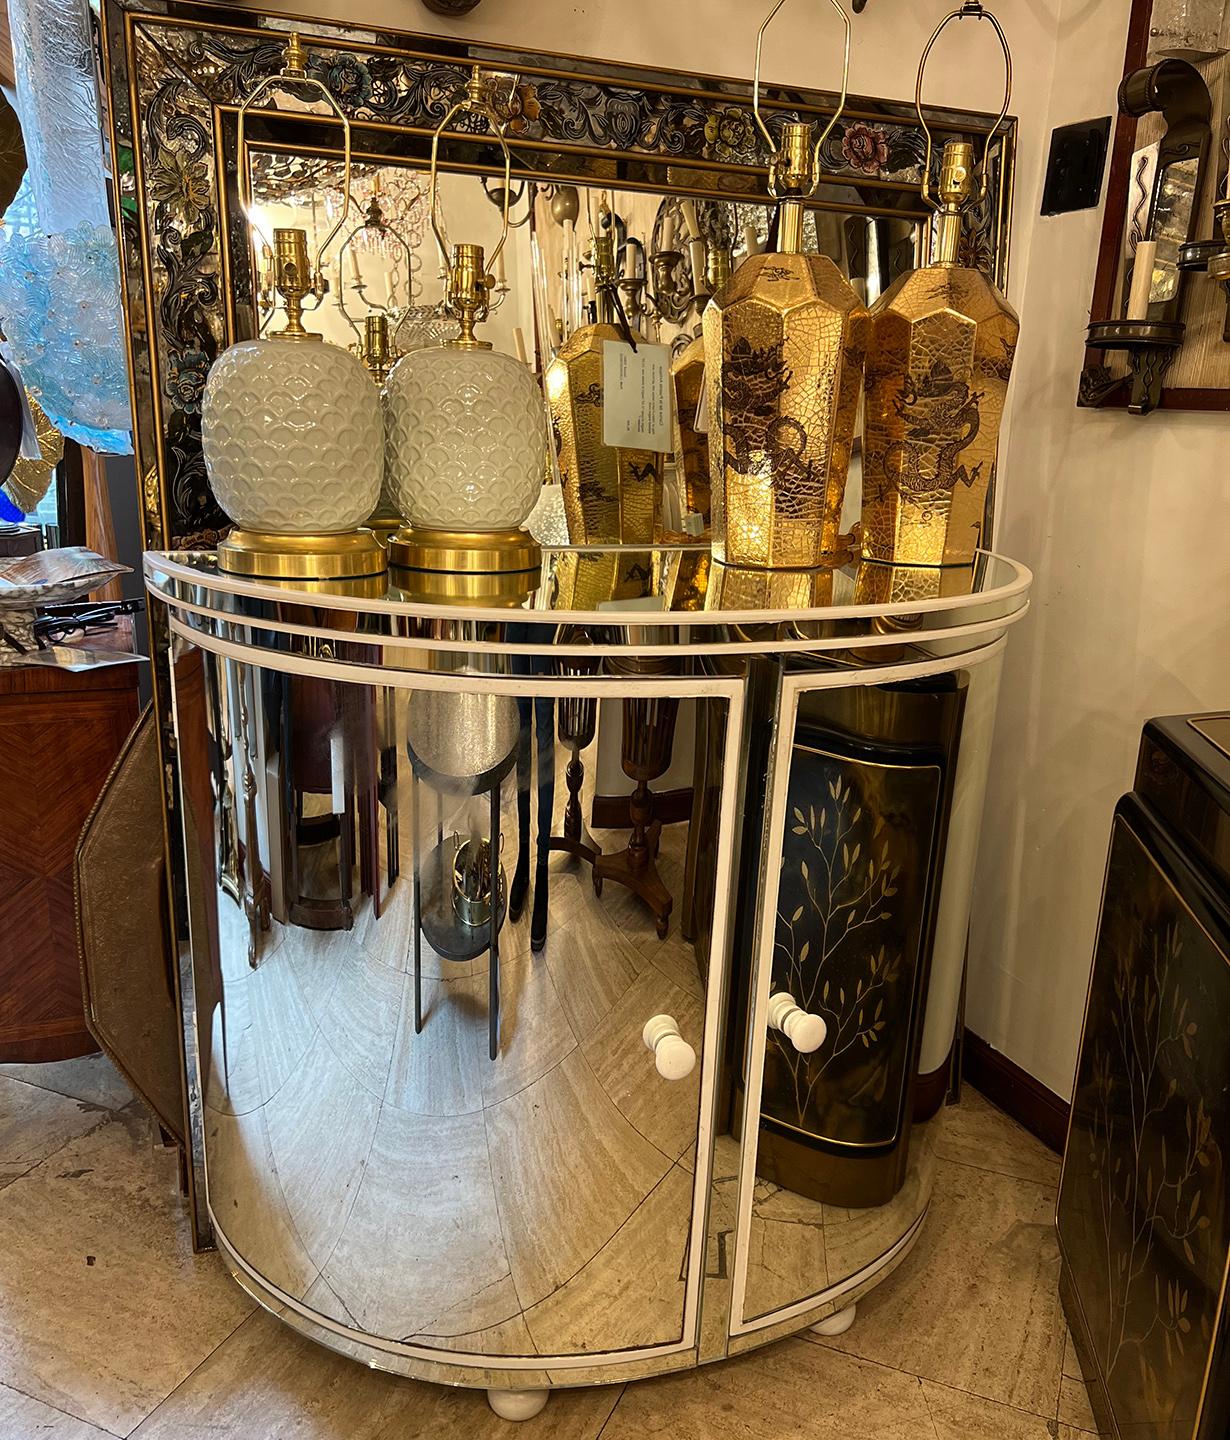 Pair of circa 1950s French mirrored cabinets with original finish.

Measurements:
Height: 36